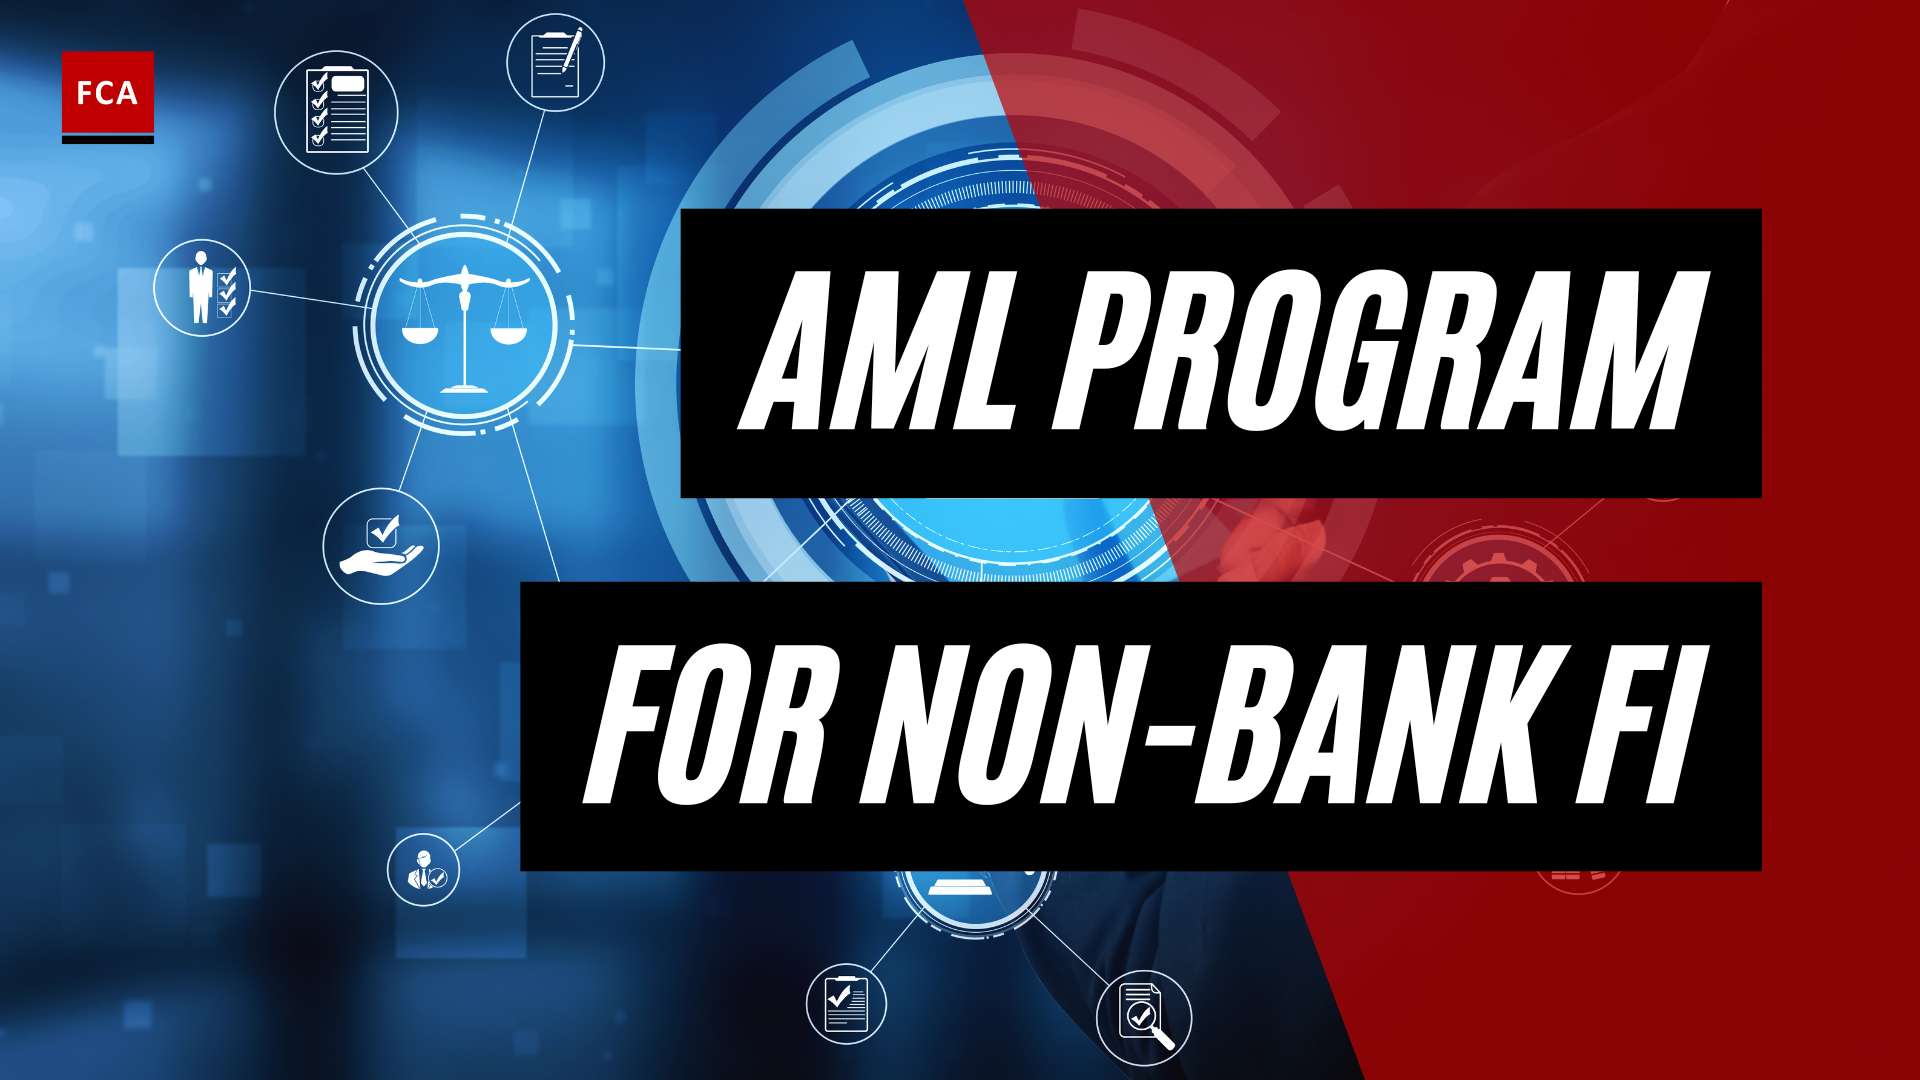 Compliance Made Easy: Streamlining Aml Programs For Non-Bank Financial Institutions